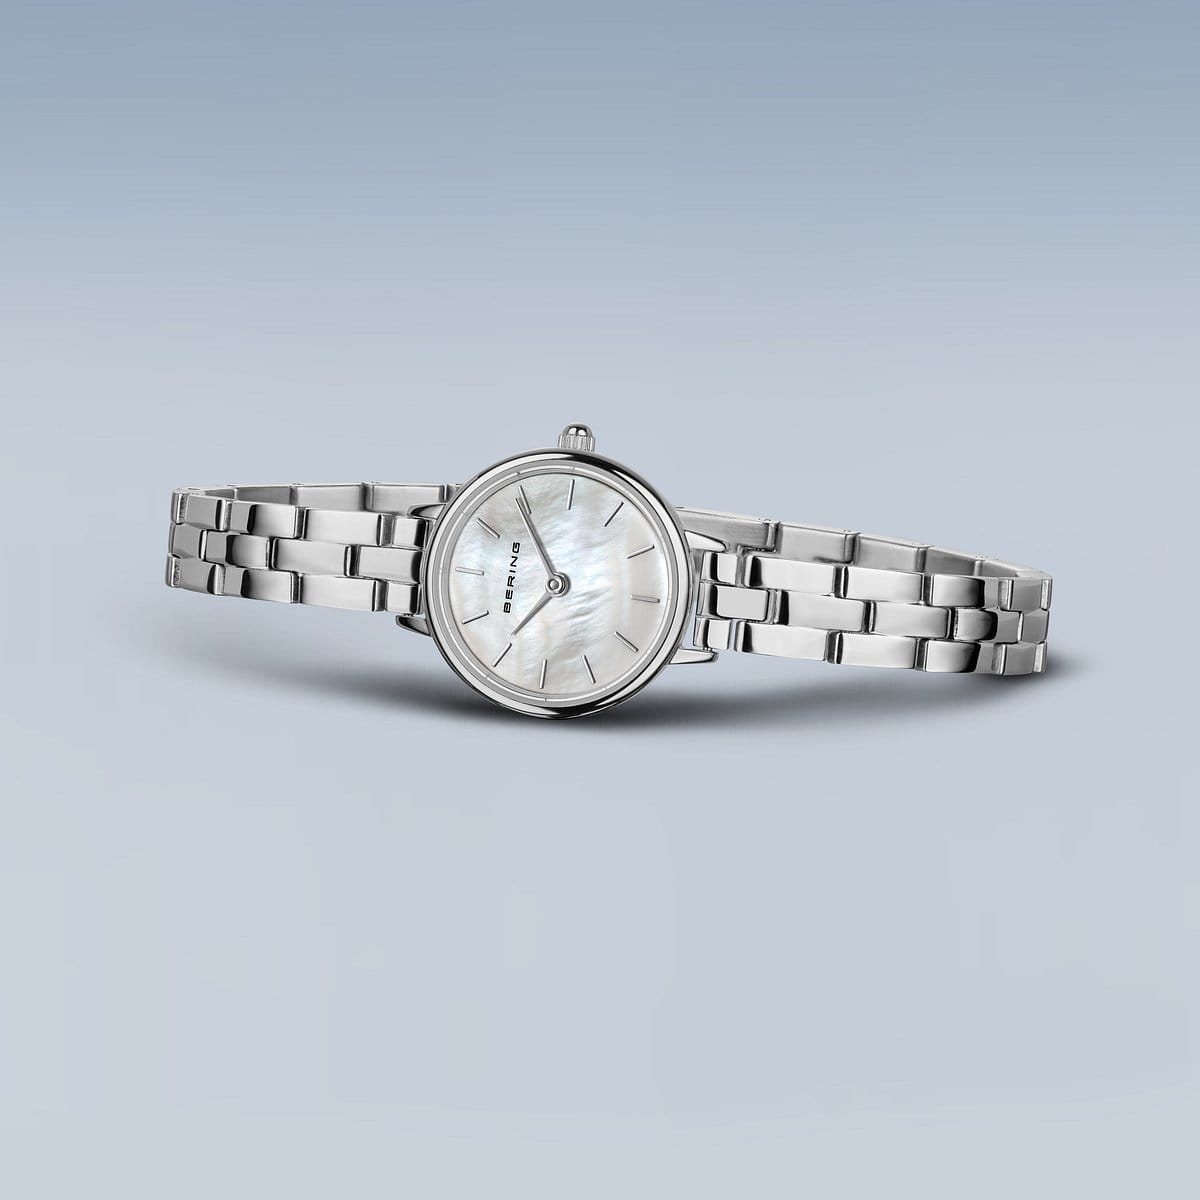 Bering Classic Collection 11022-704